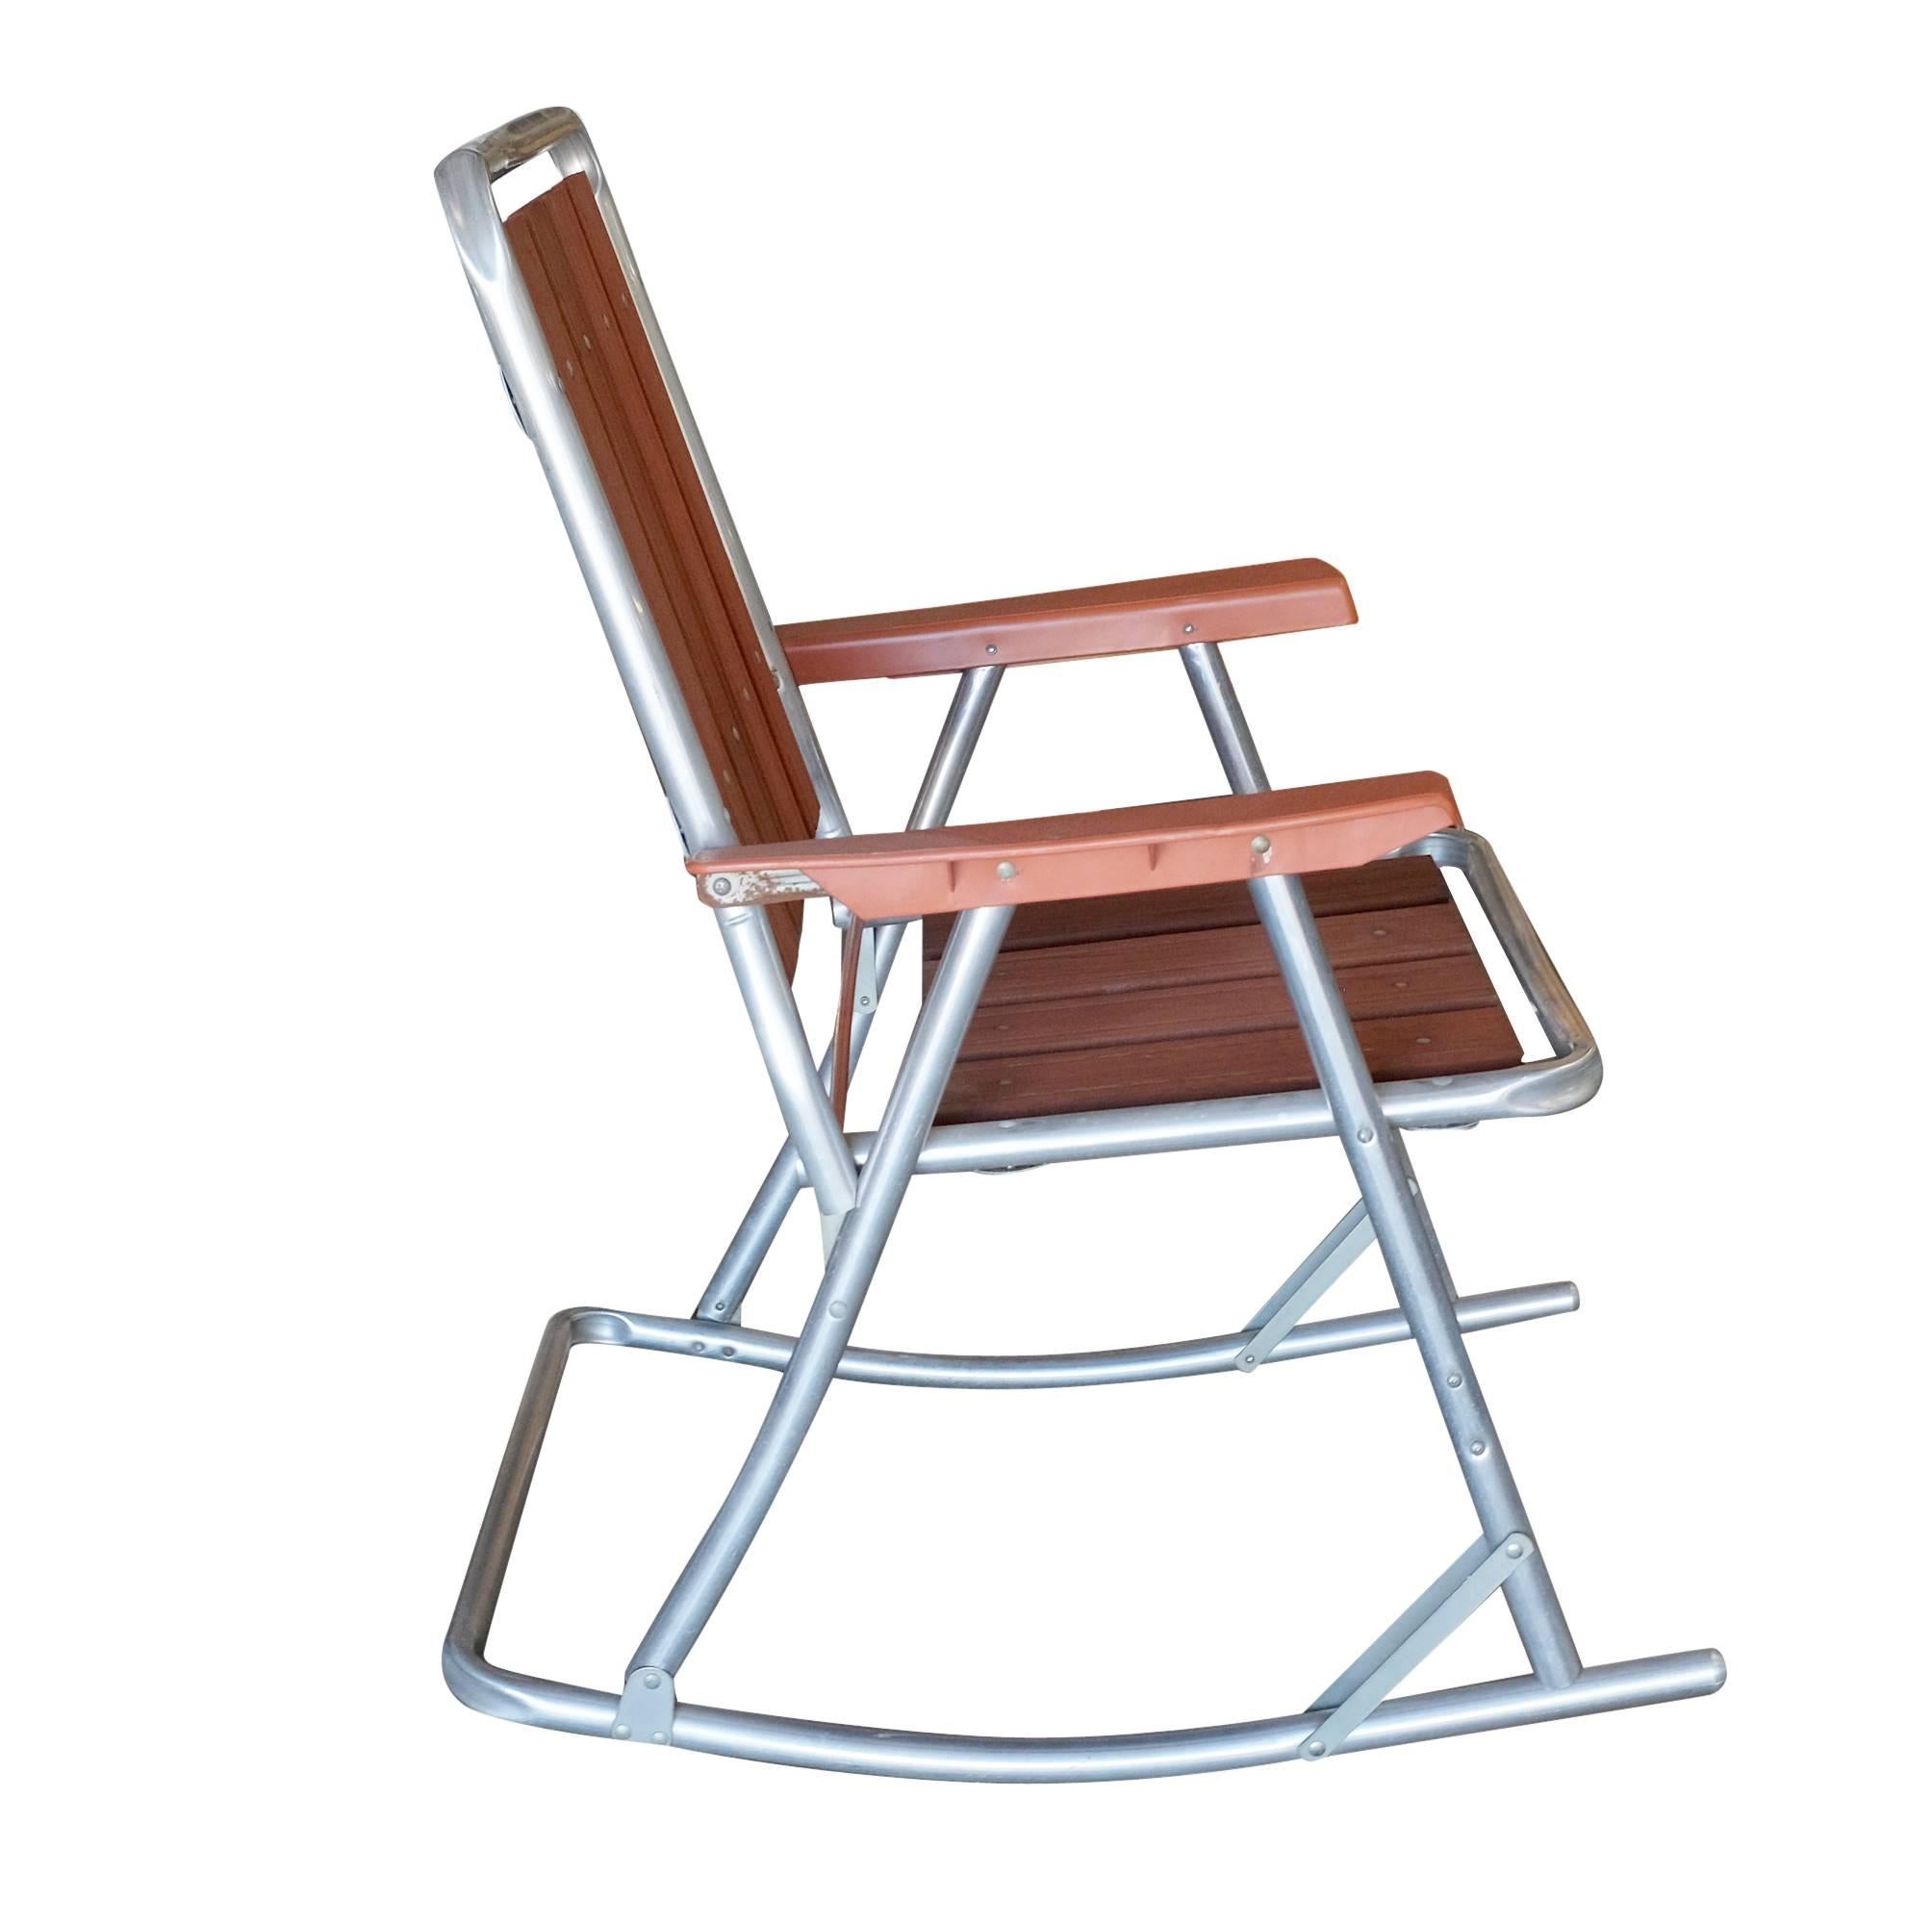 Mid-century aluminum and wood outdoor/patio folding rocking chair, pair

Condition- Like New.